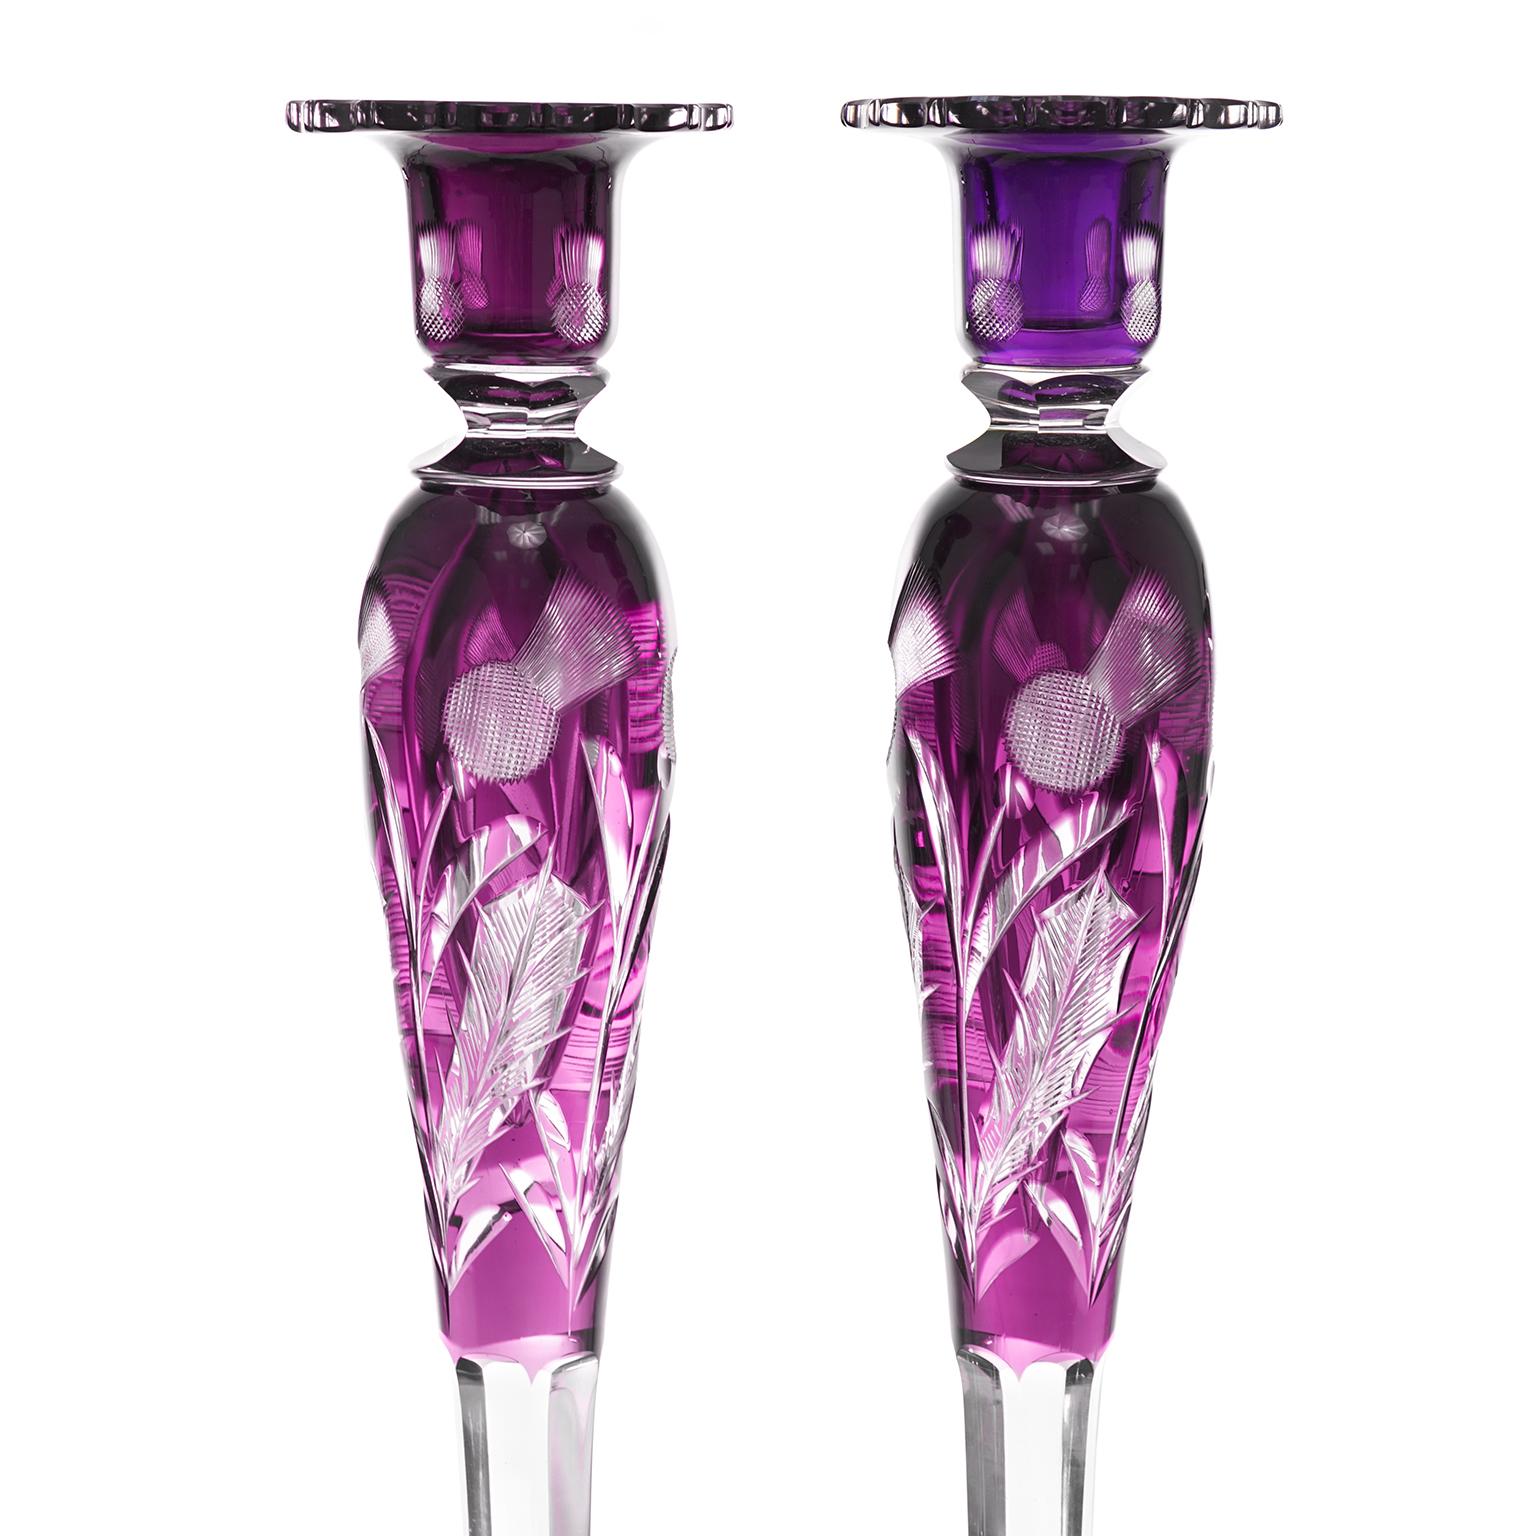 Monumental Steuben Amethyst Candlesticks In Excellent Condition For Sale In Litchfield, CT